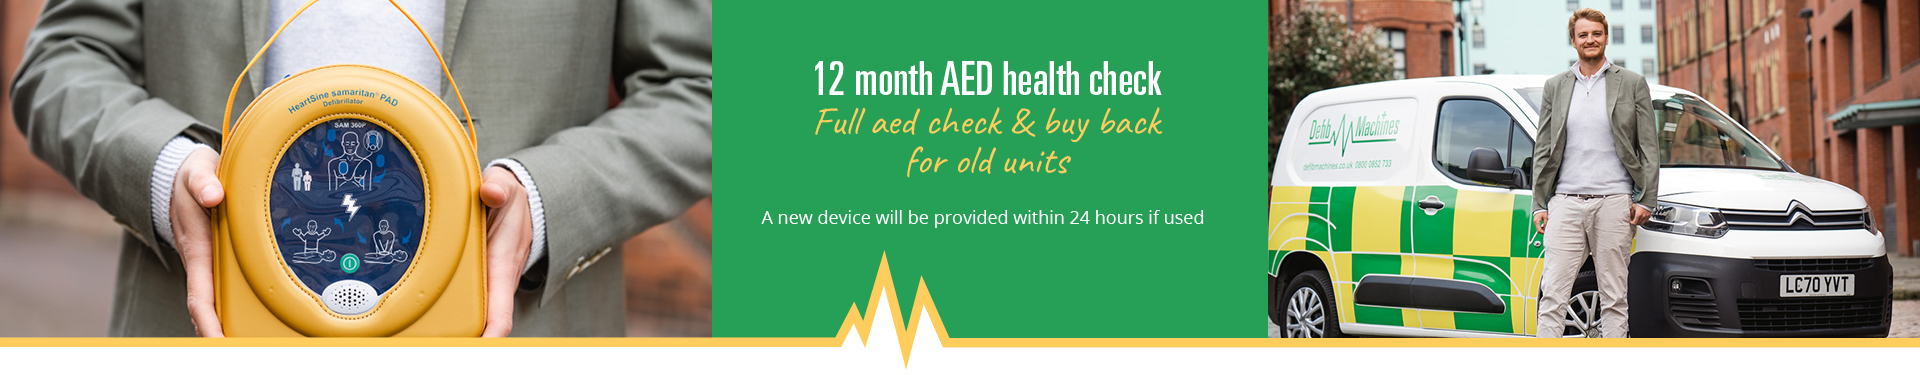 See our full range of defibs starting from £1